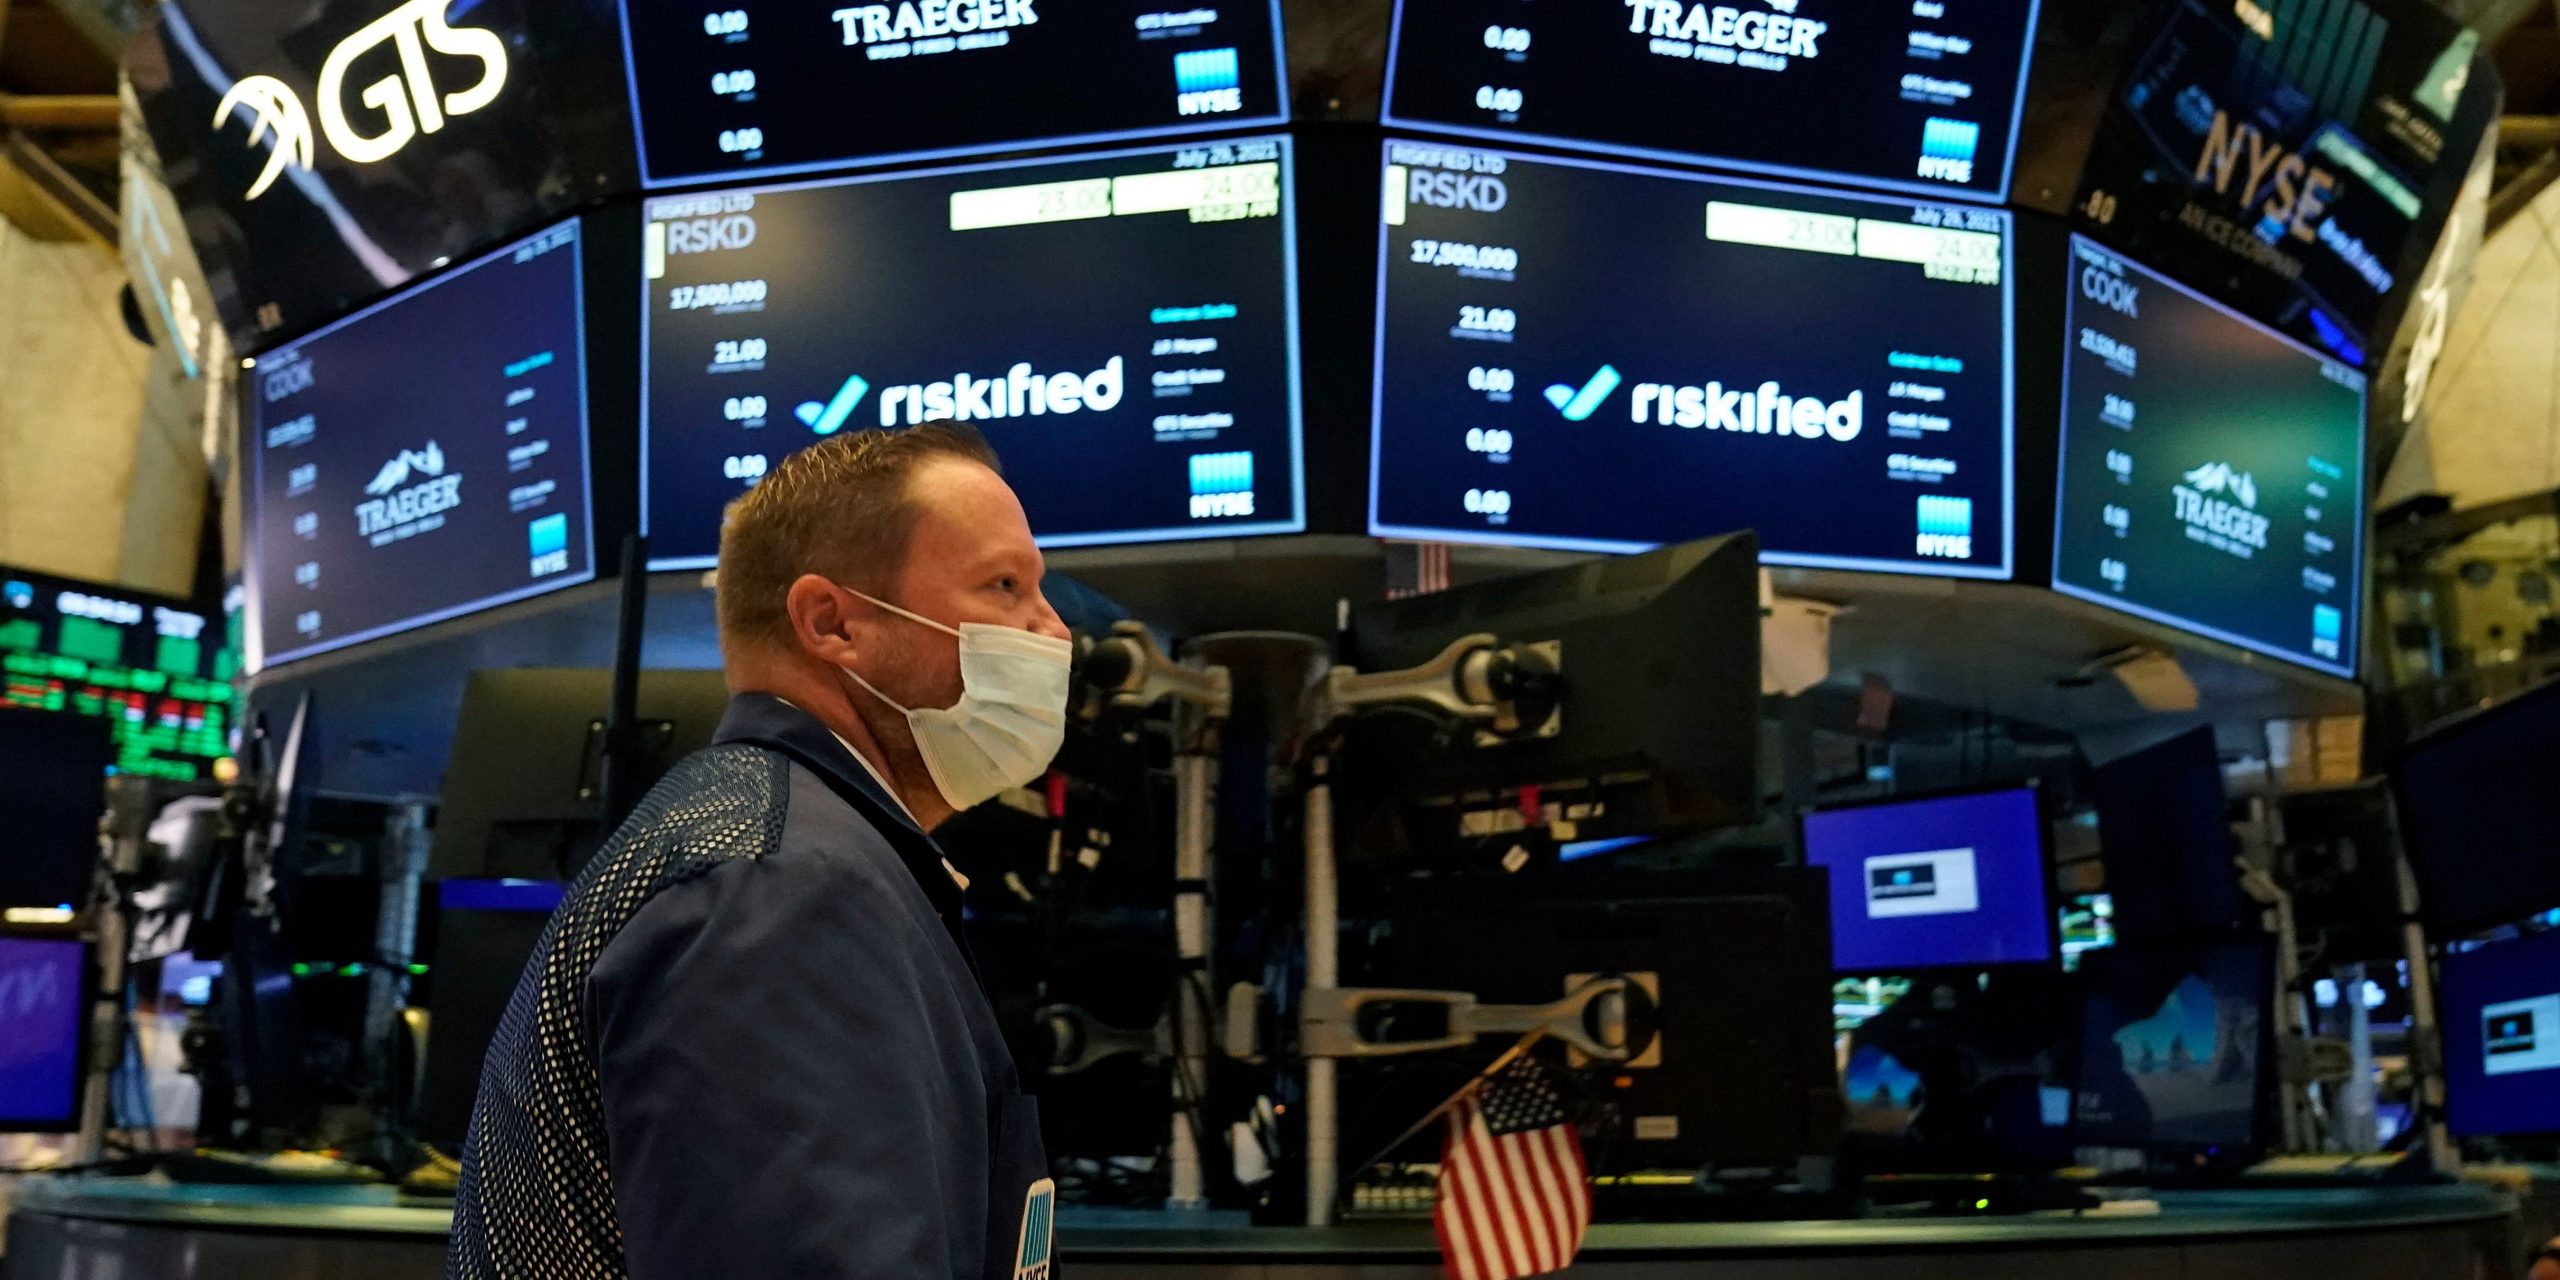 Traders work on the floor at the New York Stock Exchange in New York, on July 29, 2021.